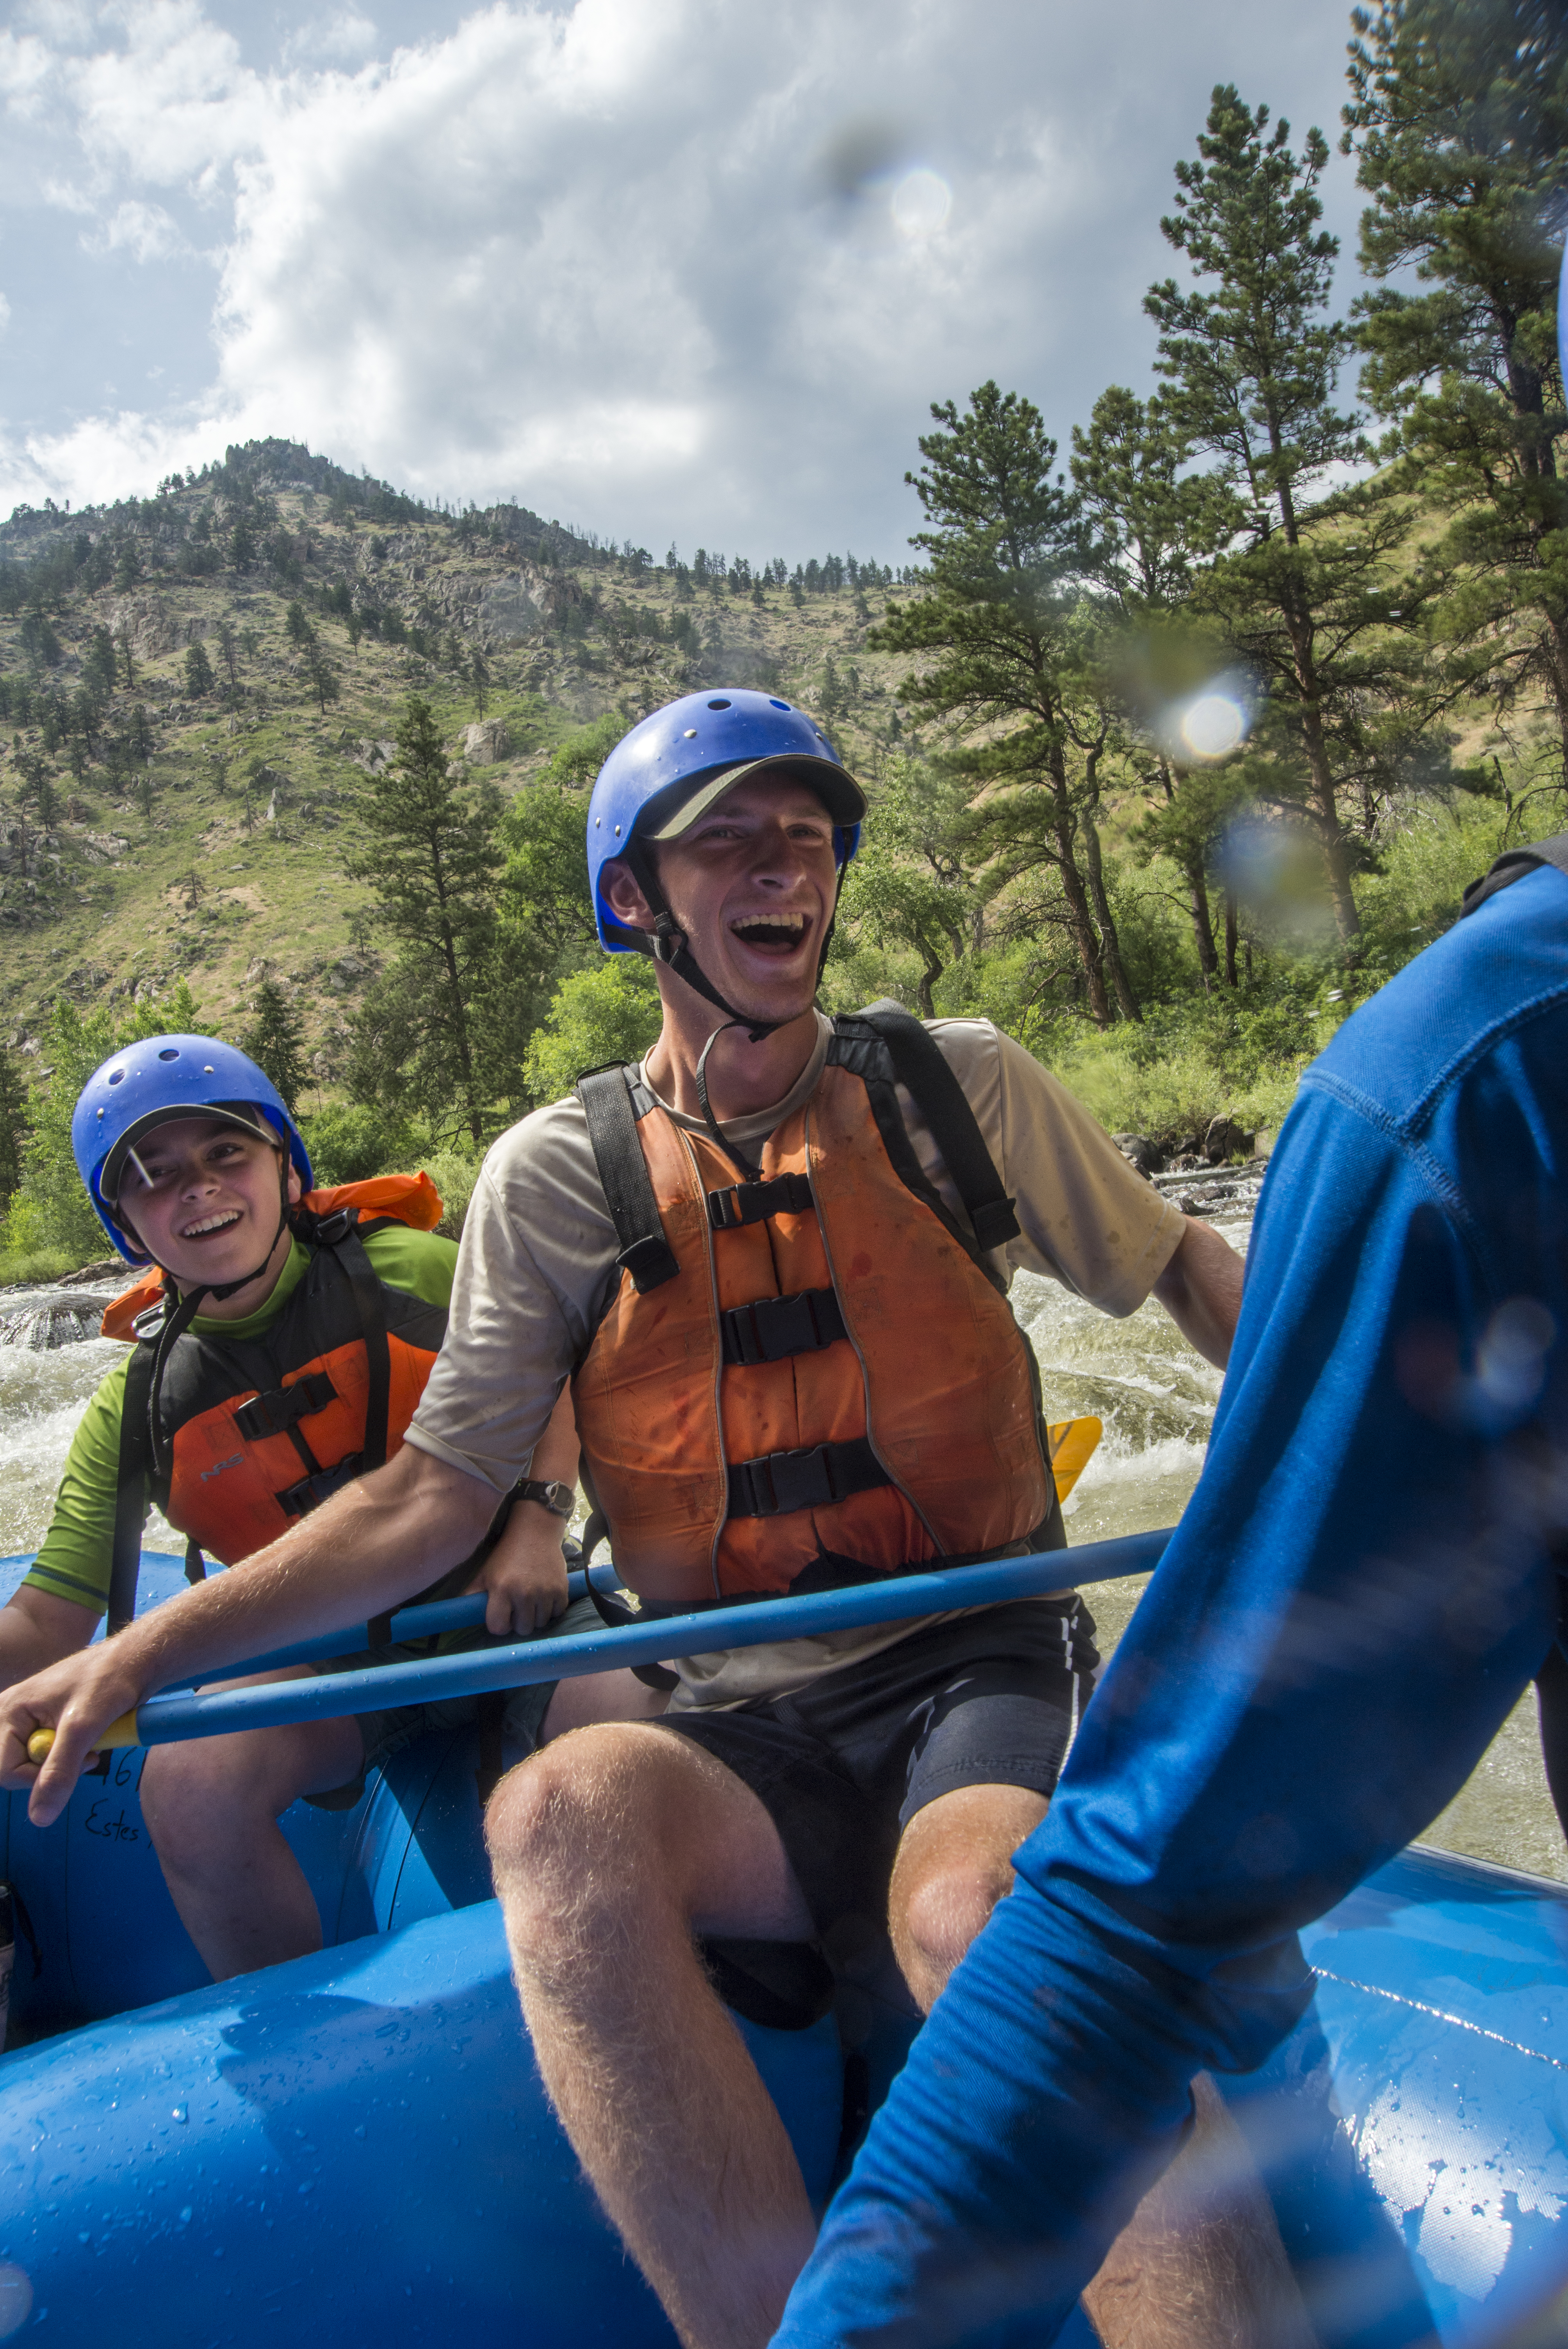 Scouts from PA enjoy a whitewater rafting trip on the Cache La Poudre River, during their adventure trip to Colorado